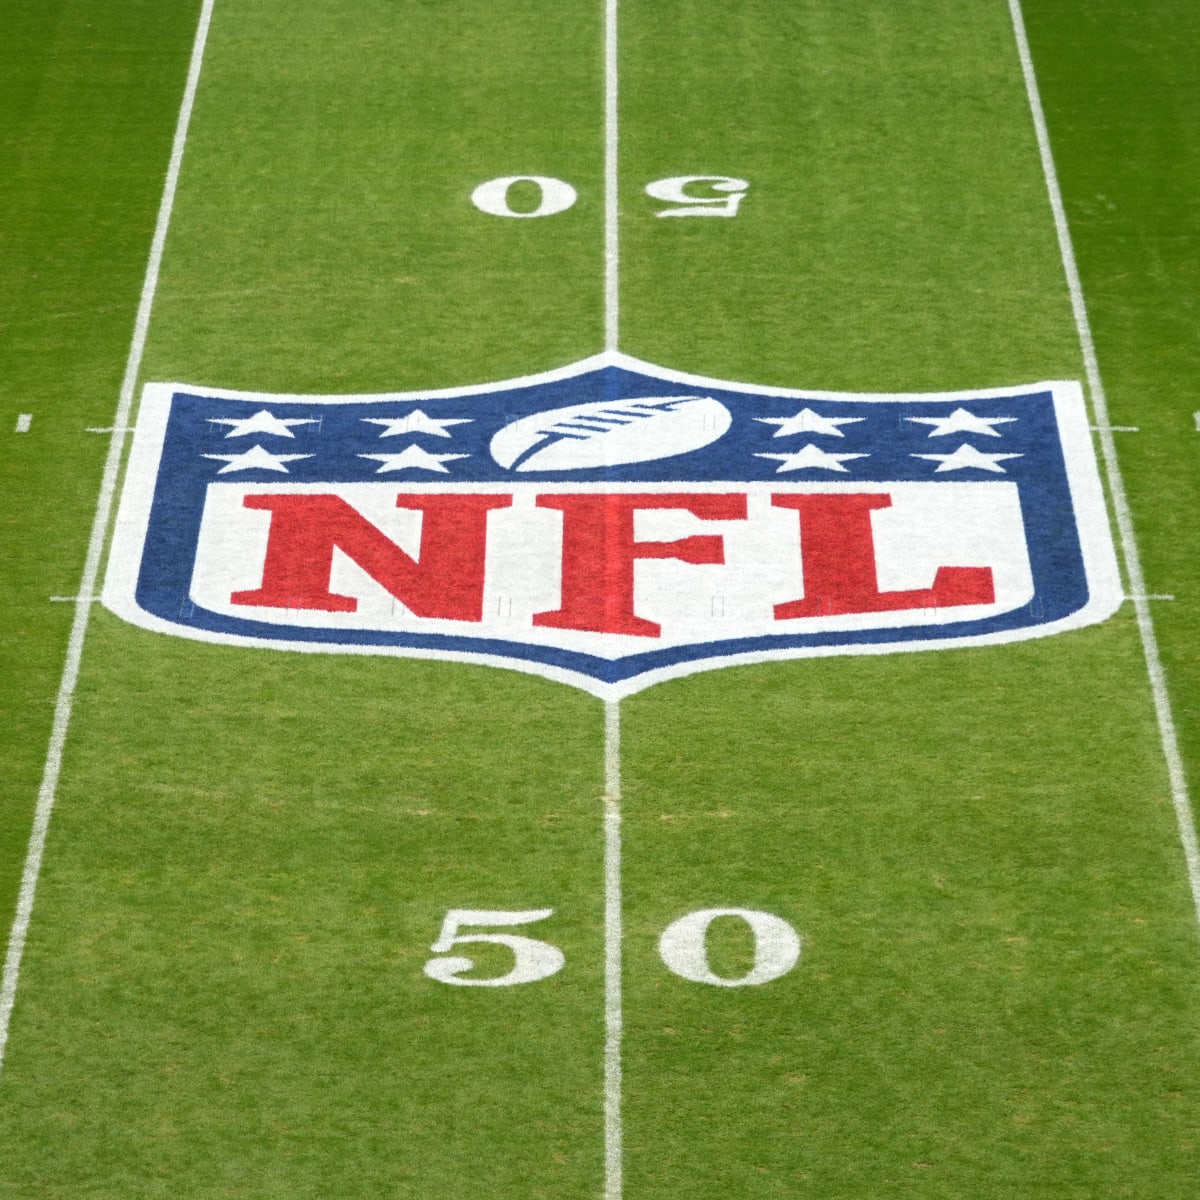 Who plays Monday Night Football tonight? TV channel, time and schedule for  NFL Week 5 game